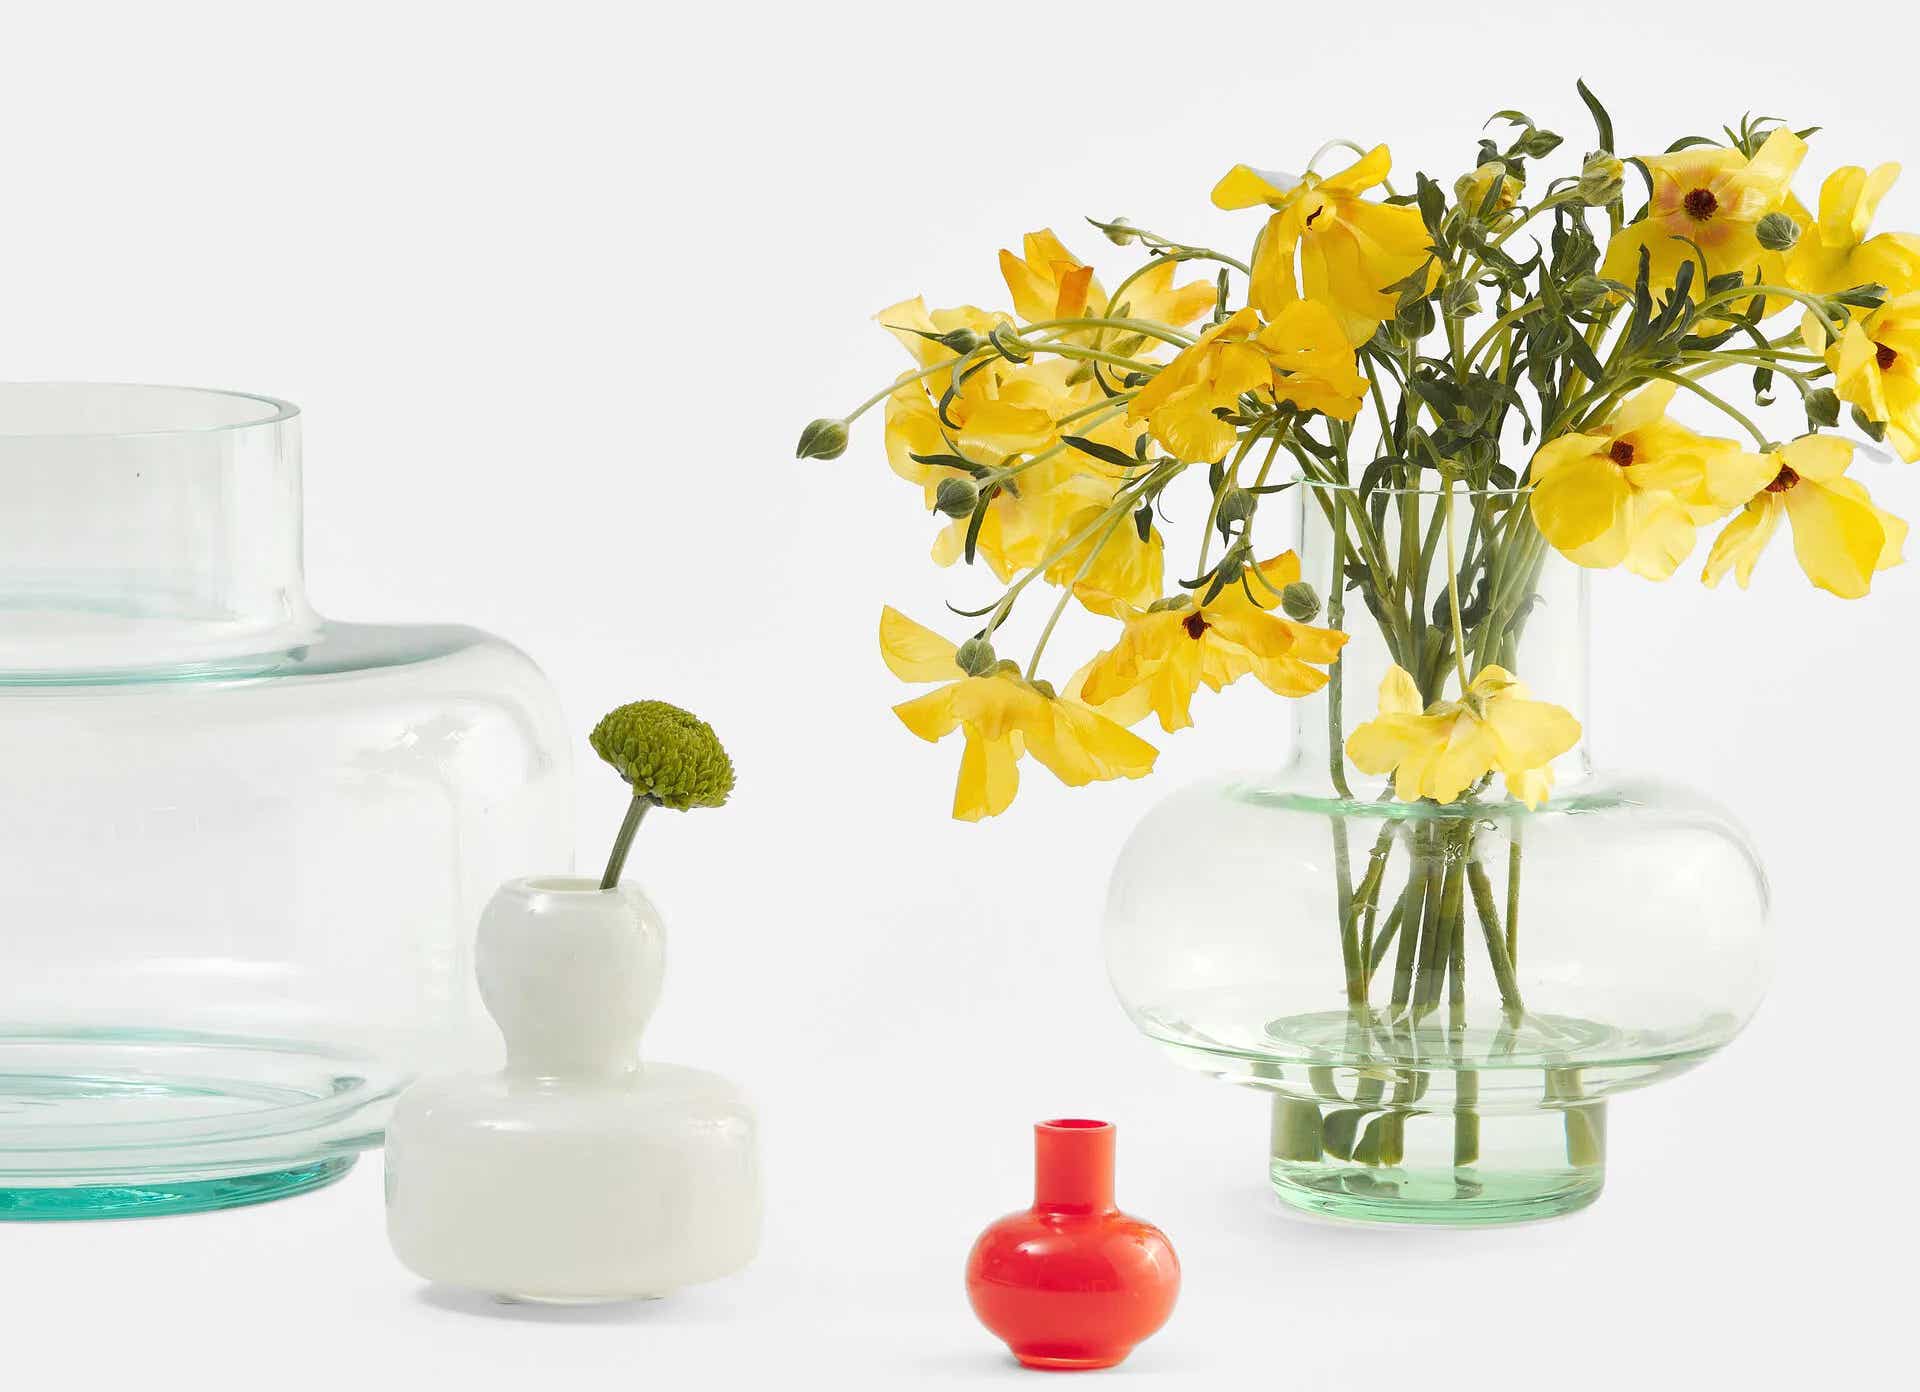 Vases collection